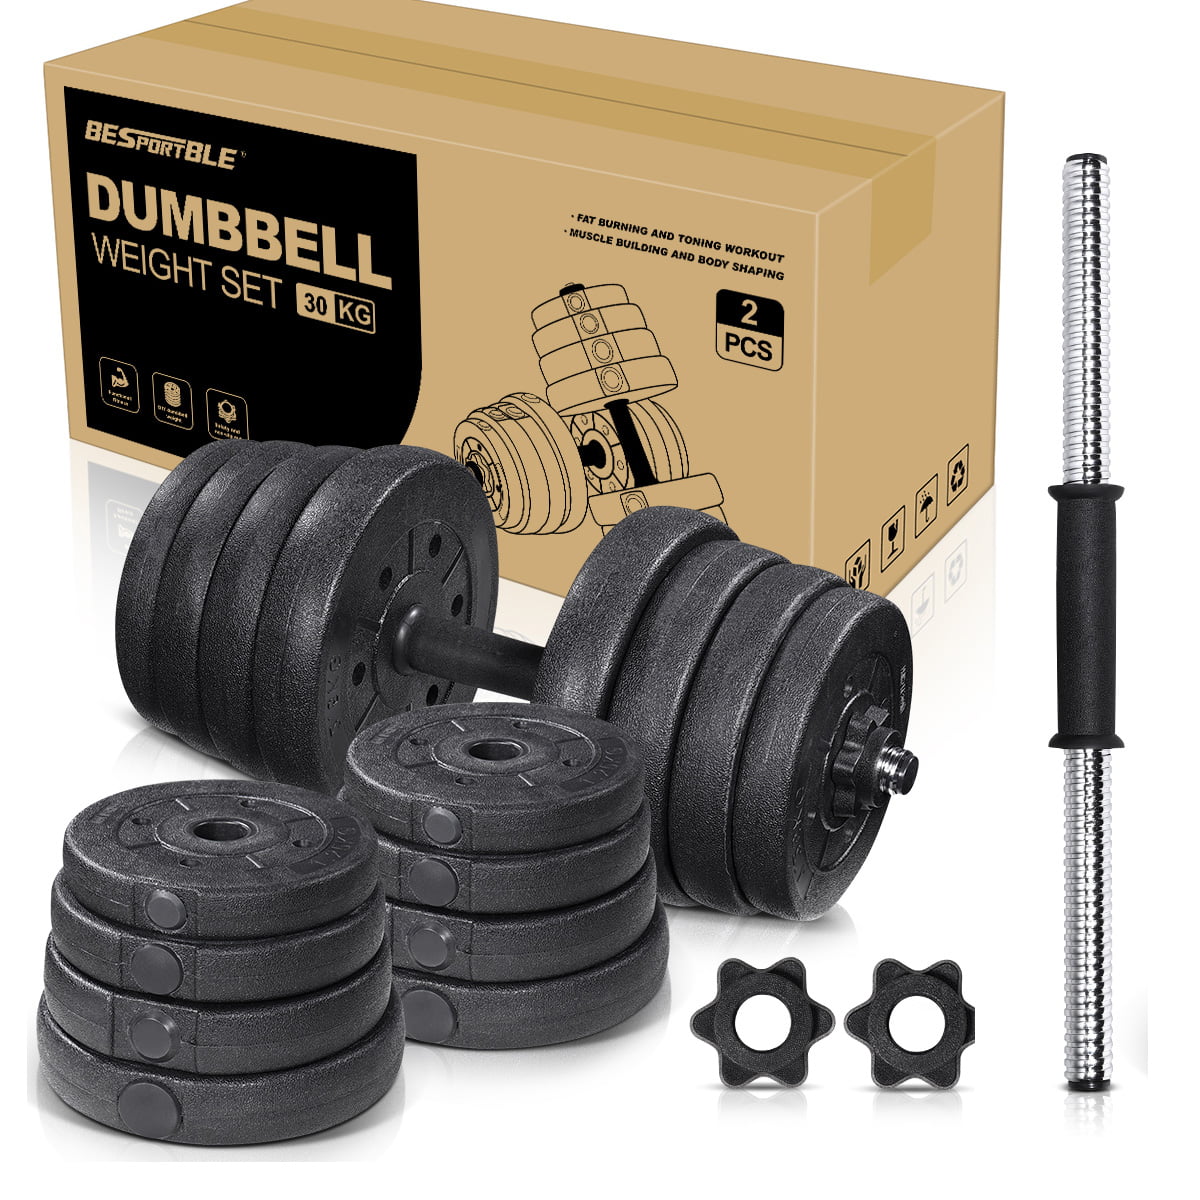 220LBS Lifting Dumbbells Set with 16 Barbell Plates & Star Locks GYMAX Adjustable Dumbbell Set Strength Training Workout Equipment for Home Gym